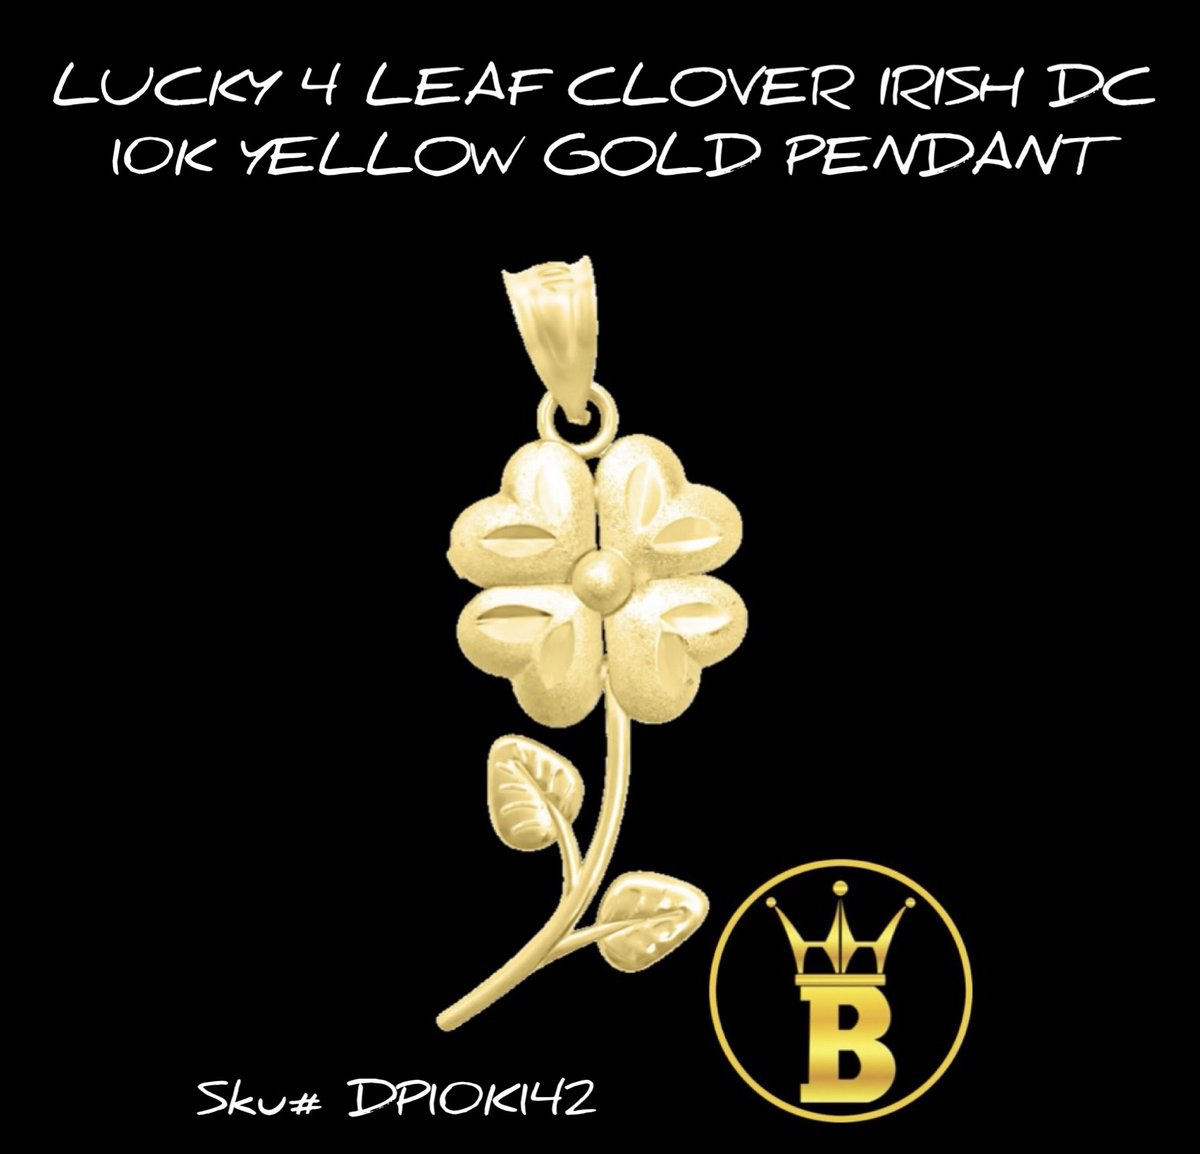 Real Gold 10k Pendant!
HipHopBling.com  @hiphopbling #hiphop #rap #hiphop #hiphopbling #blingbling #swagger #jewelry #sale #blingsale #hiphopsale #style #swag #rapper #luxury #new #fashion #website #swag #lifeisgood #caseoftheday #real